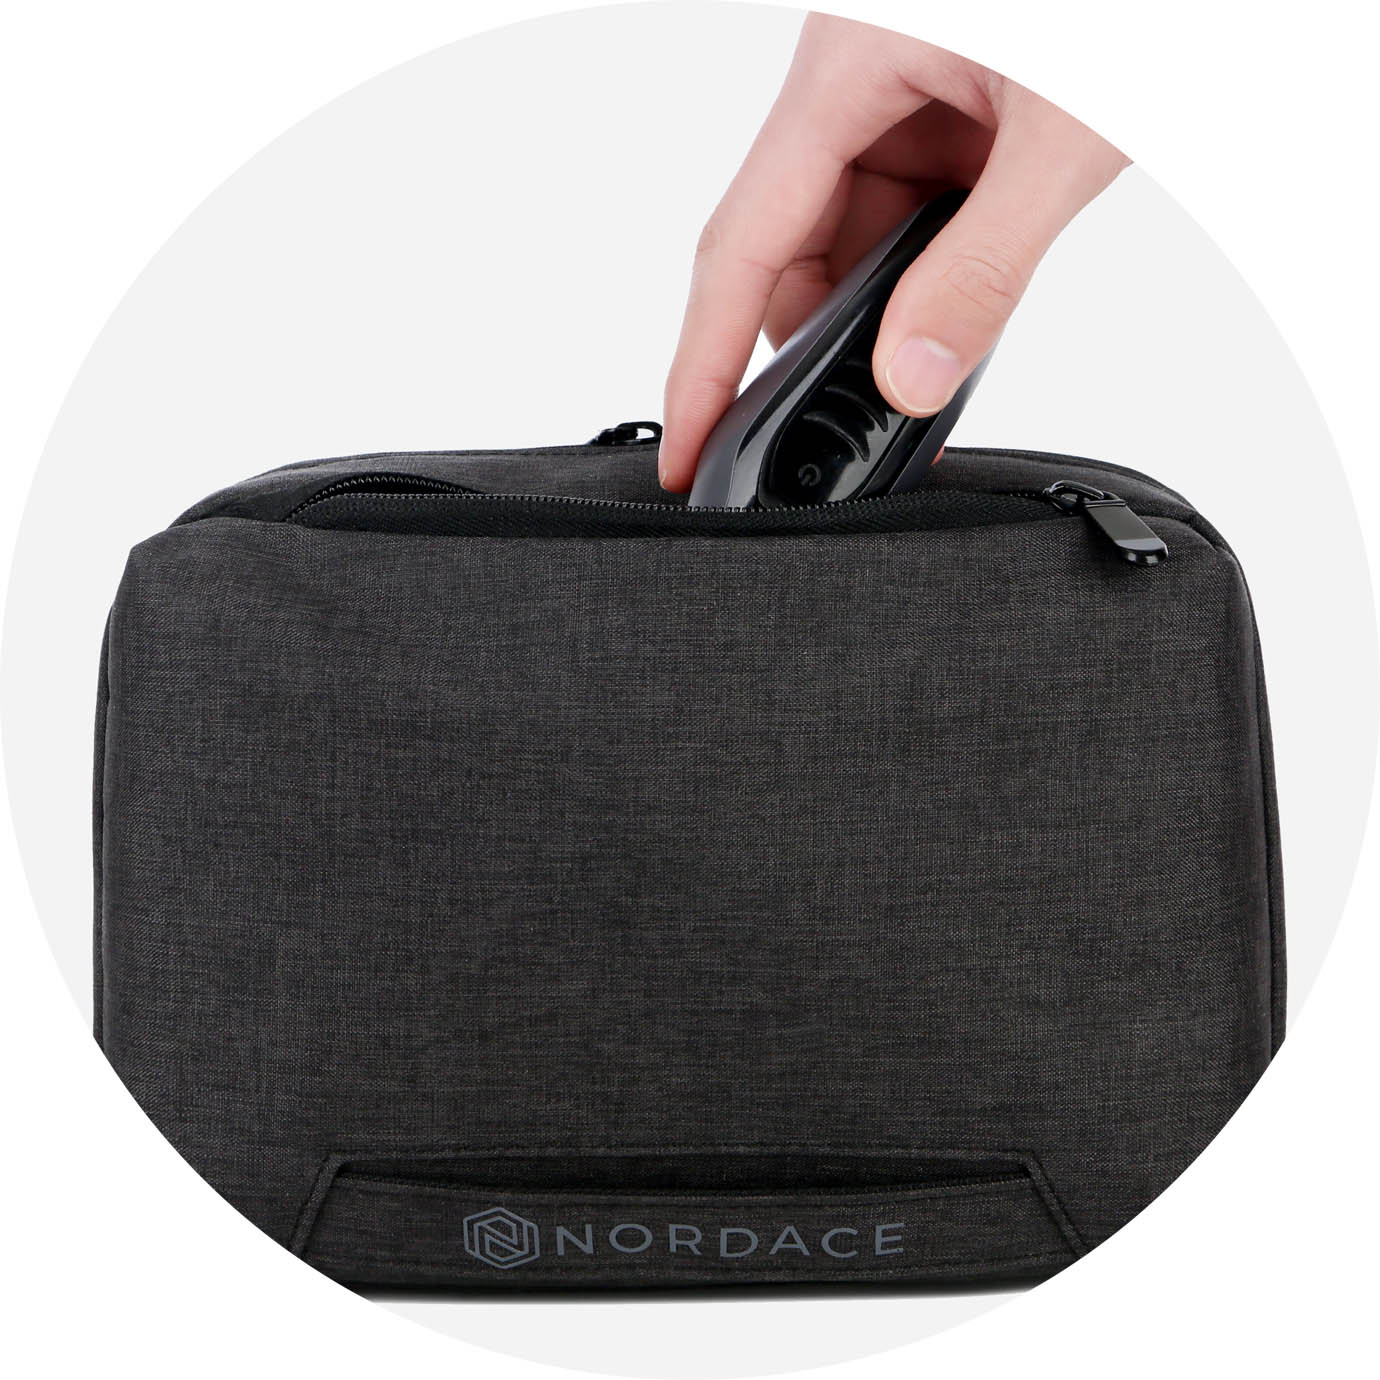 Nordace Windsor Wash Pouch